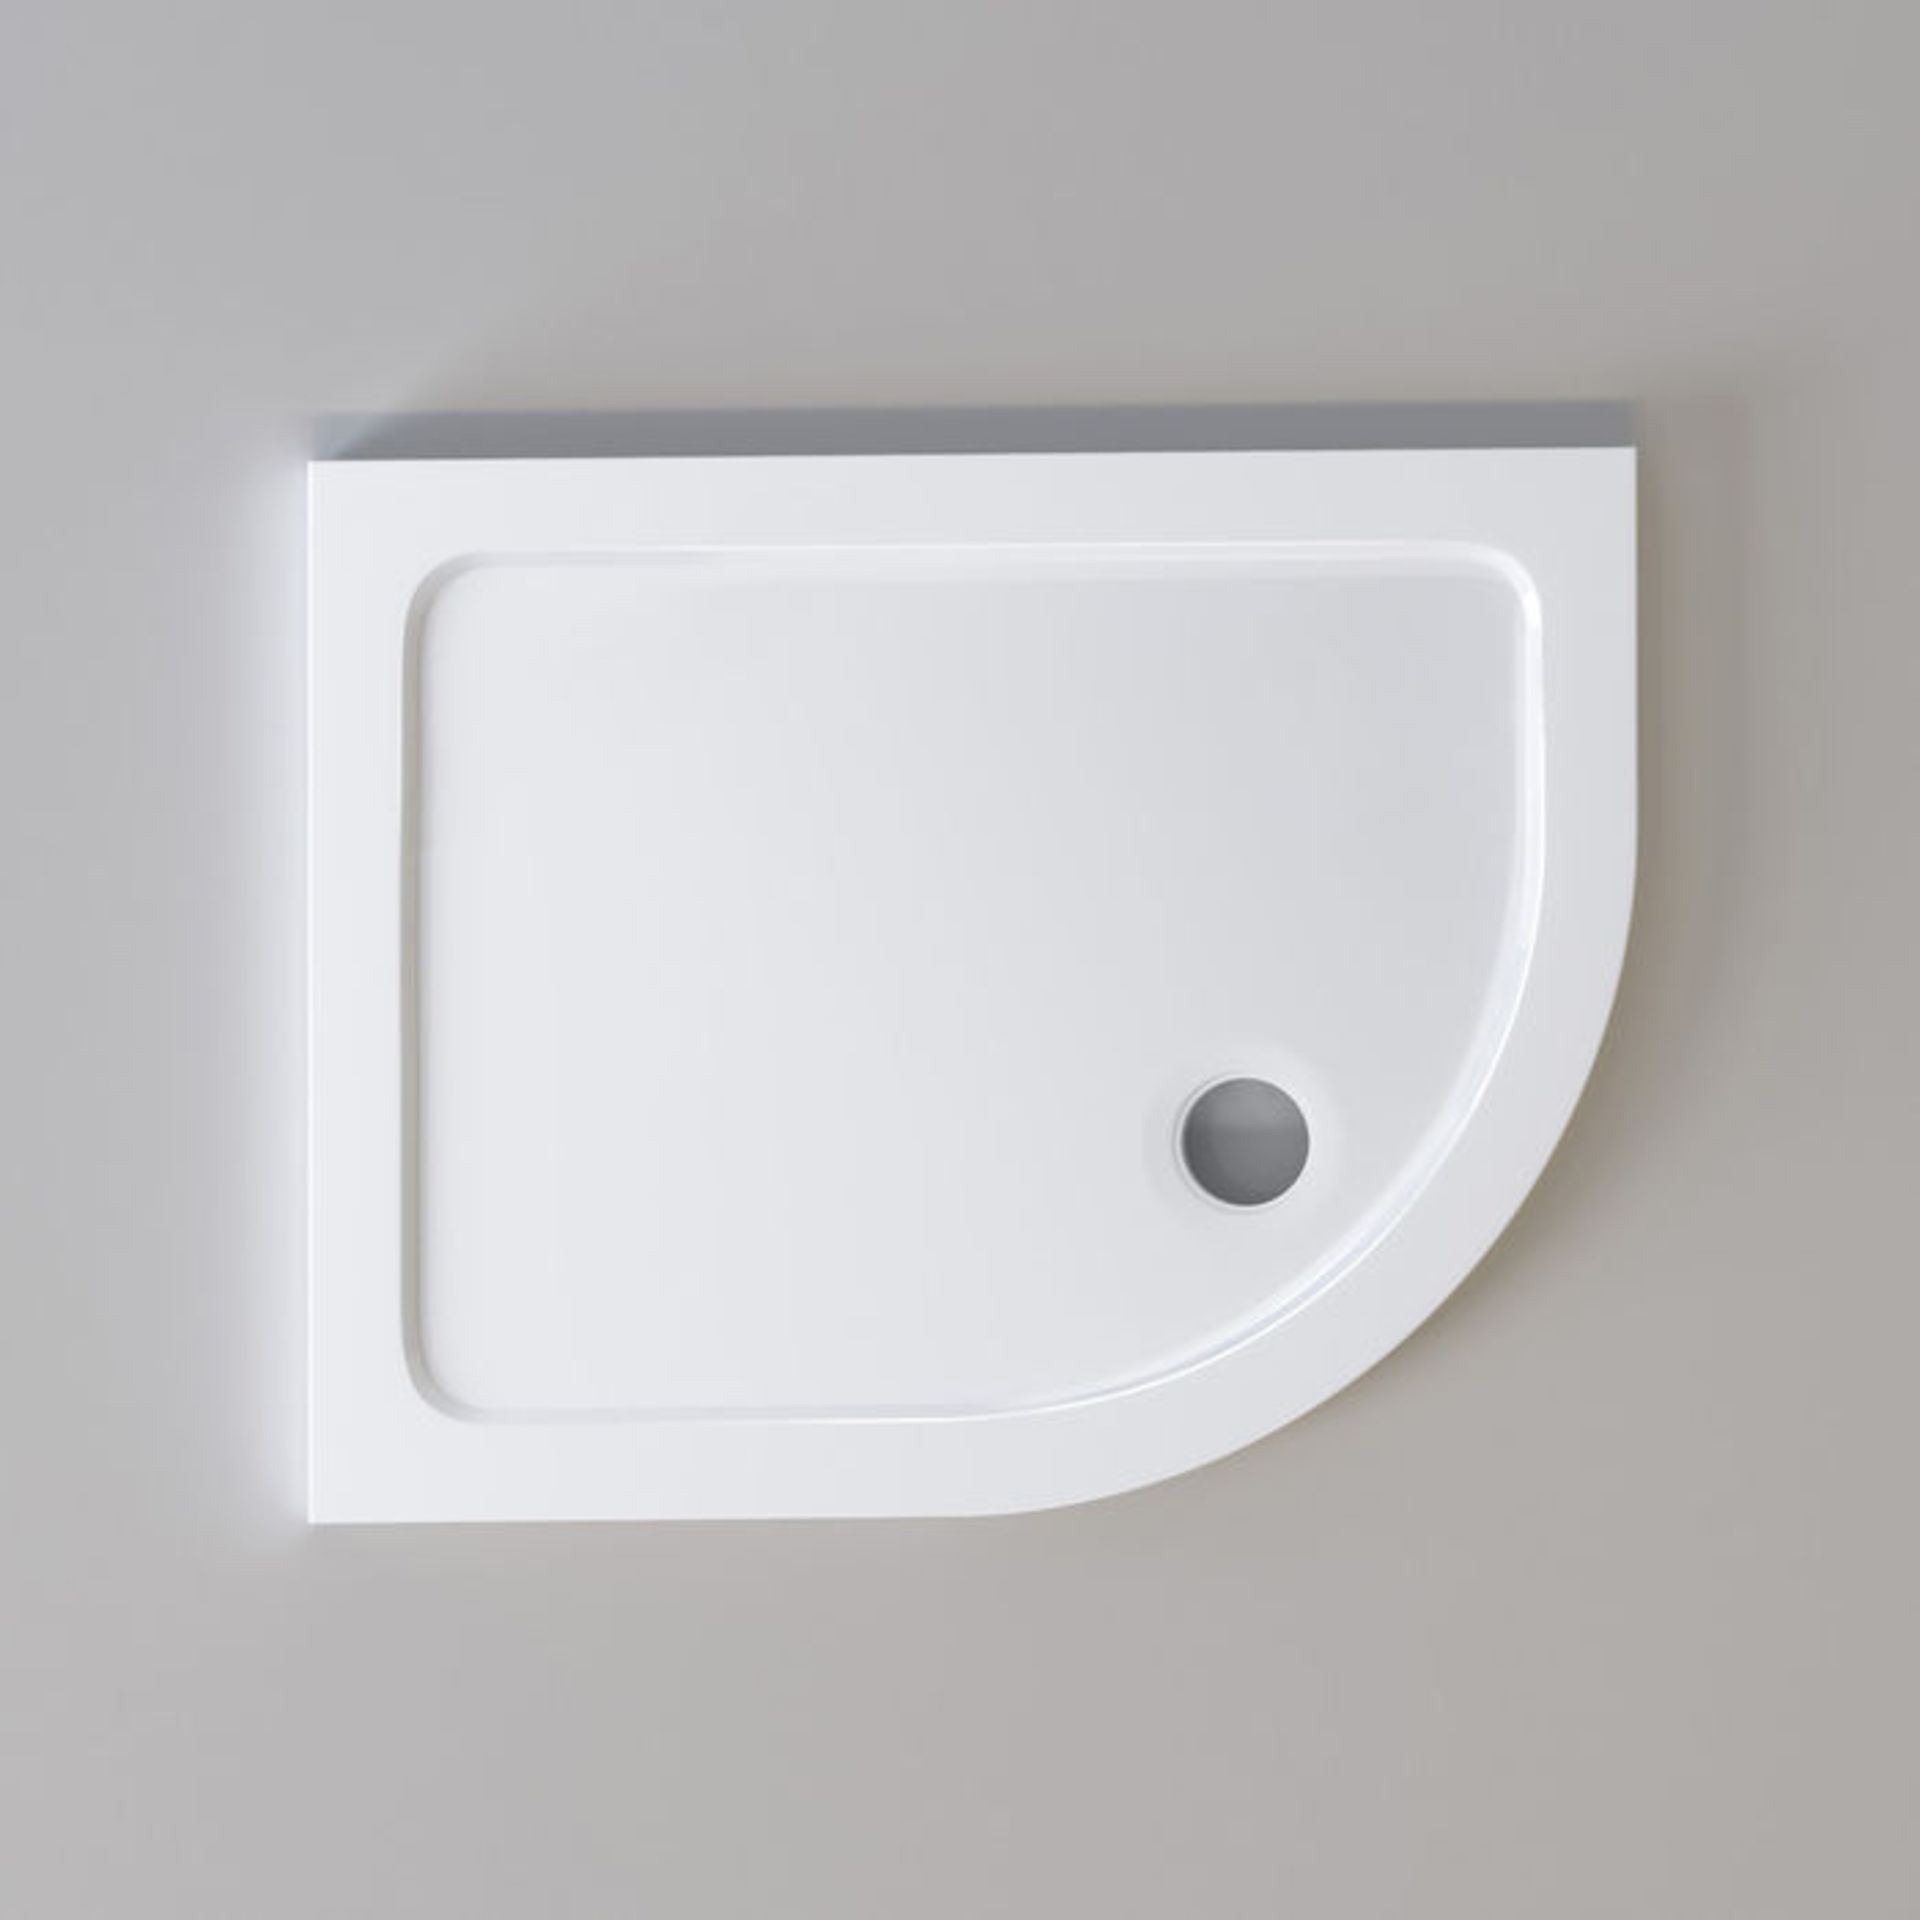 (PA227) 1000x800mm Offset Quadrant Ultraslim Stone Shower Tray - Right. RRP £249.99. Low profile